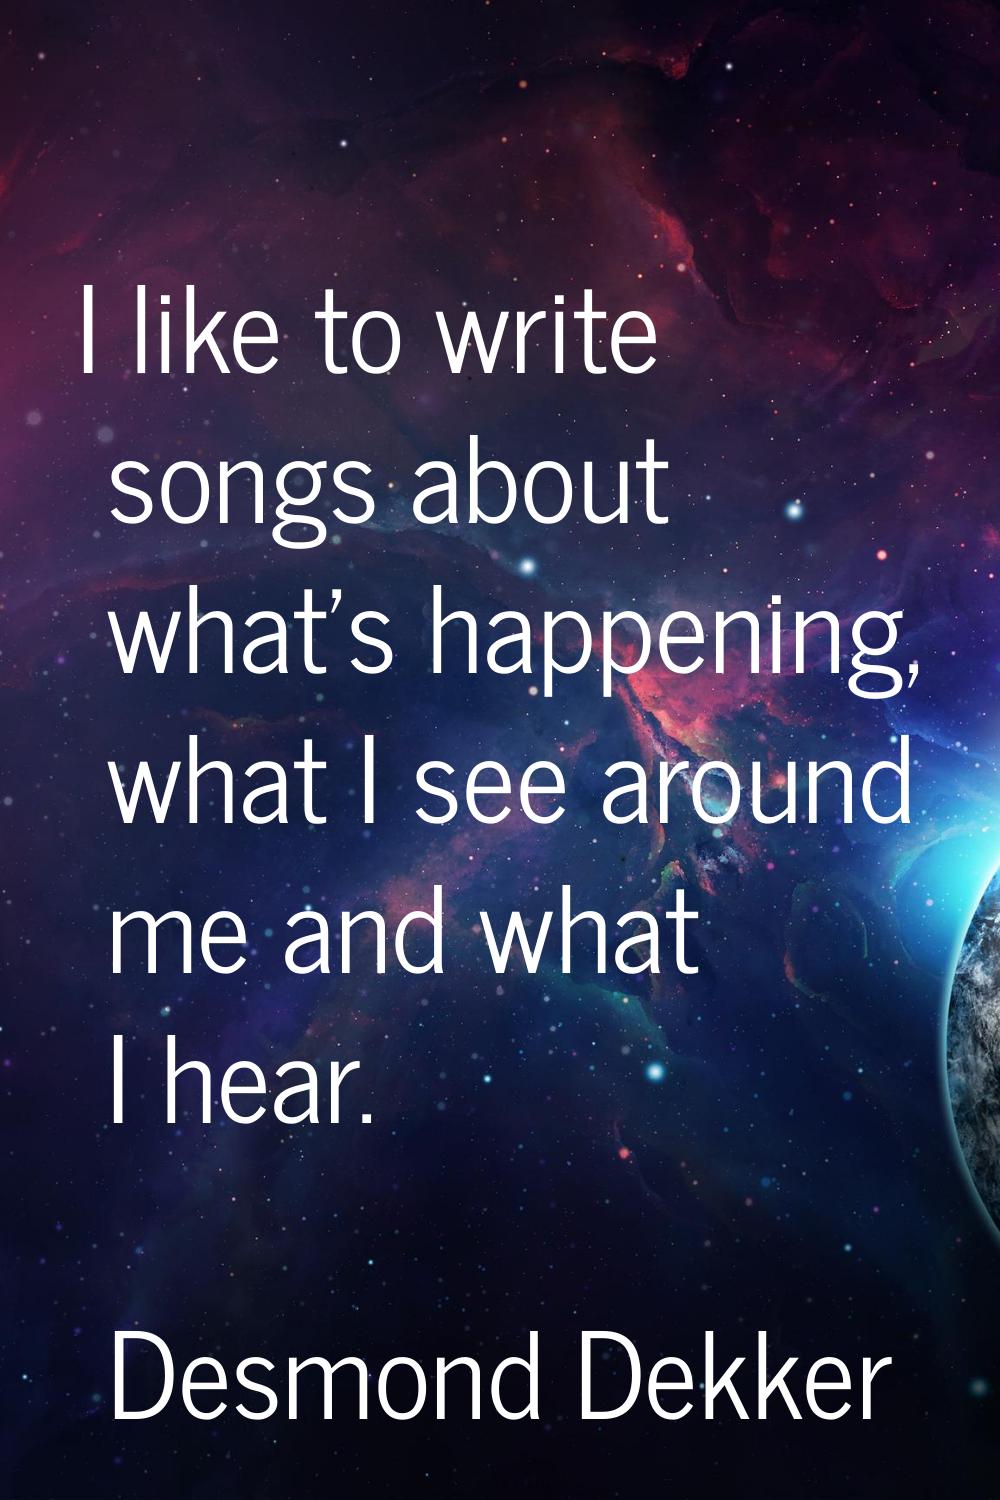 I like to write songs about what's happening, what I see around me and what I hear.